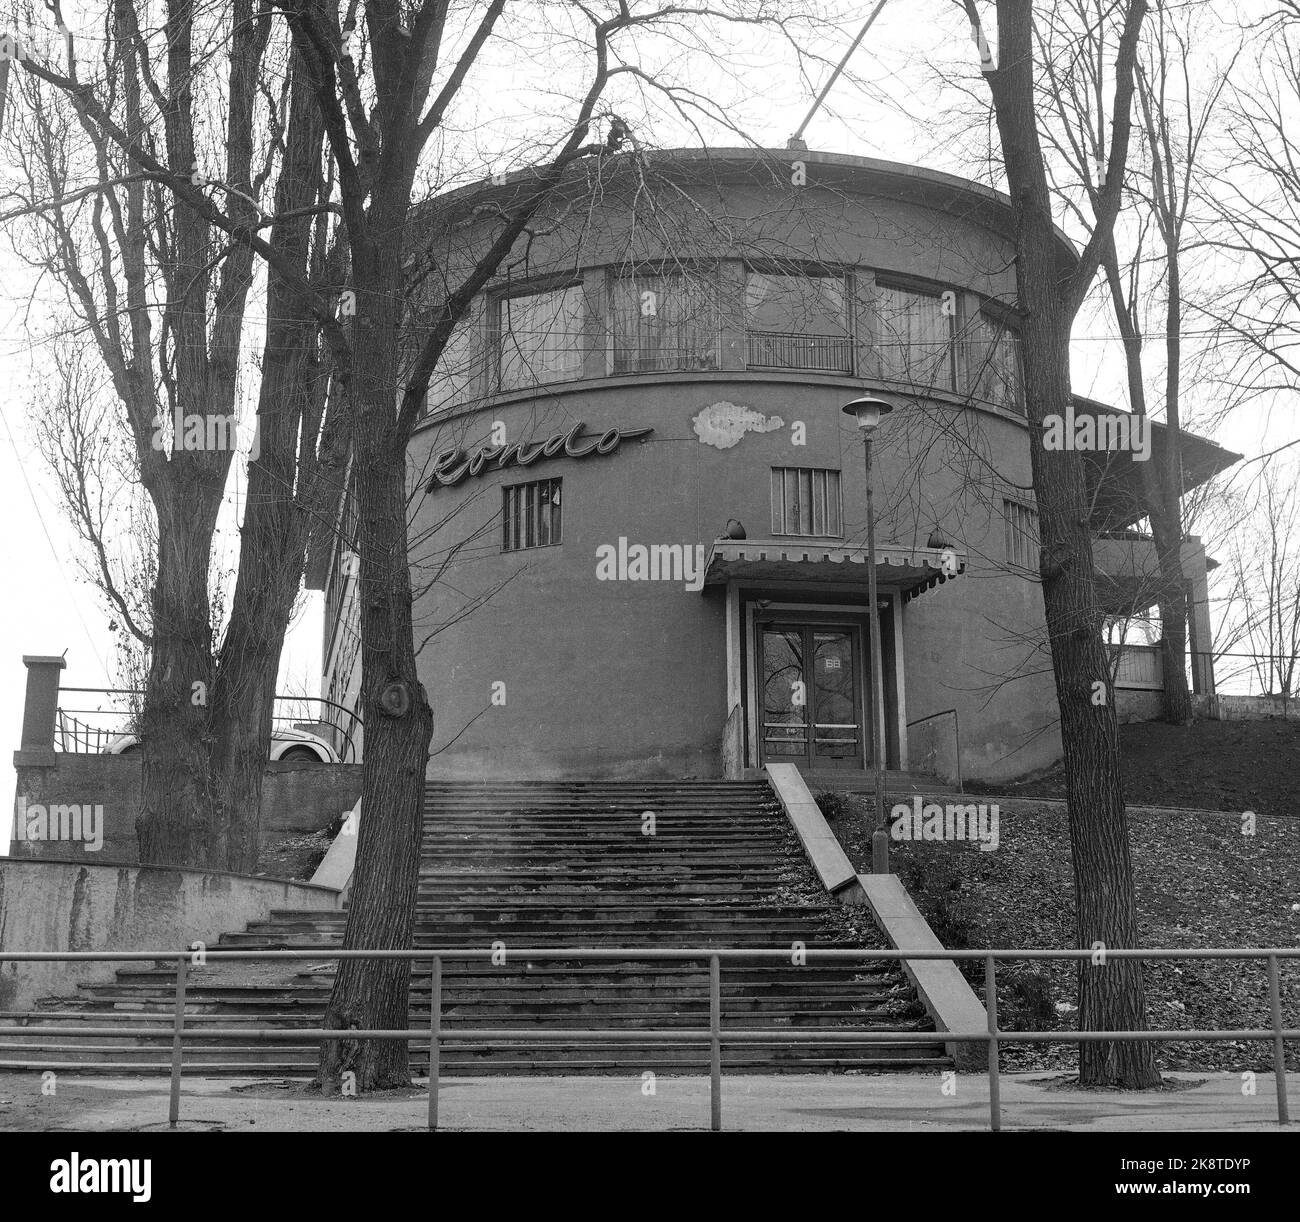 Oslo 21.04.1970. Restaurant Skansen, Norway's first funk building. Architect: Lars Backer. Listed in 1927, demolished in 1970. The youth restaurant 'Rondo' from 1962-1967 Stock Photo: NTB / NTB Stock Photo